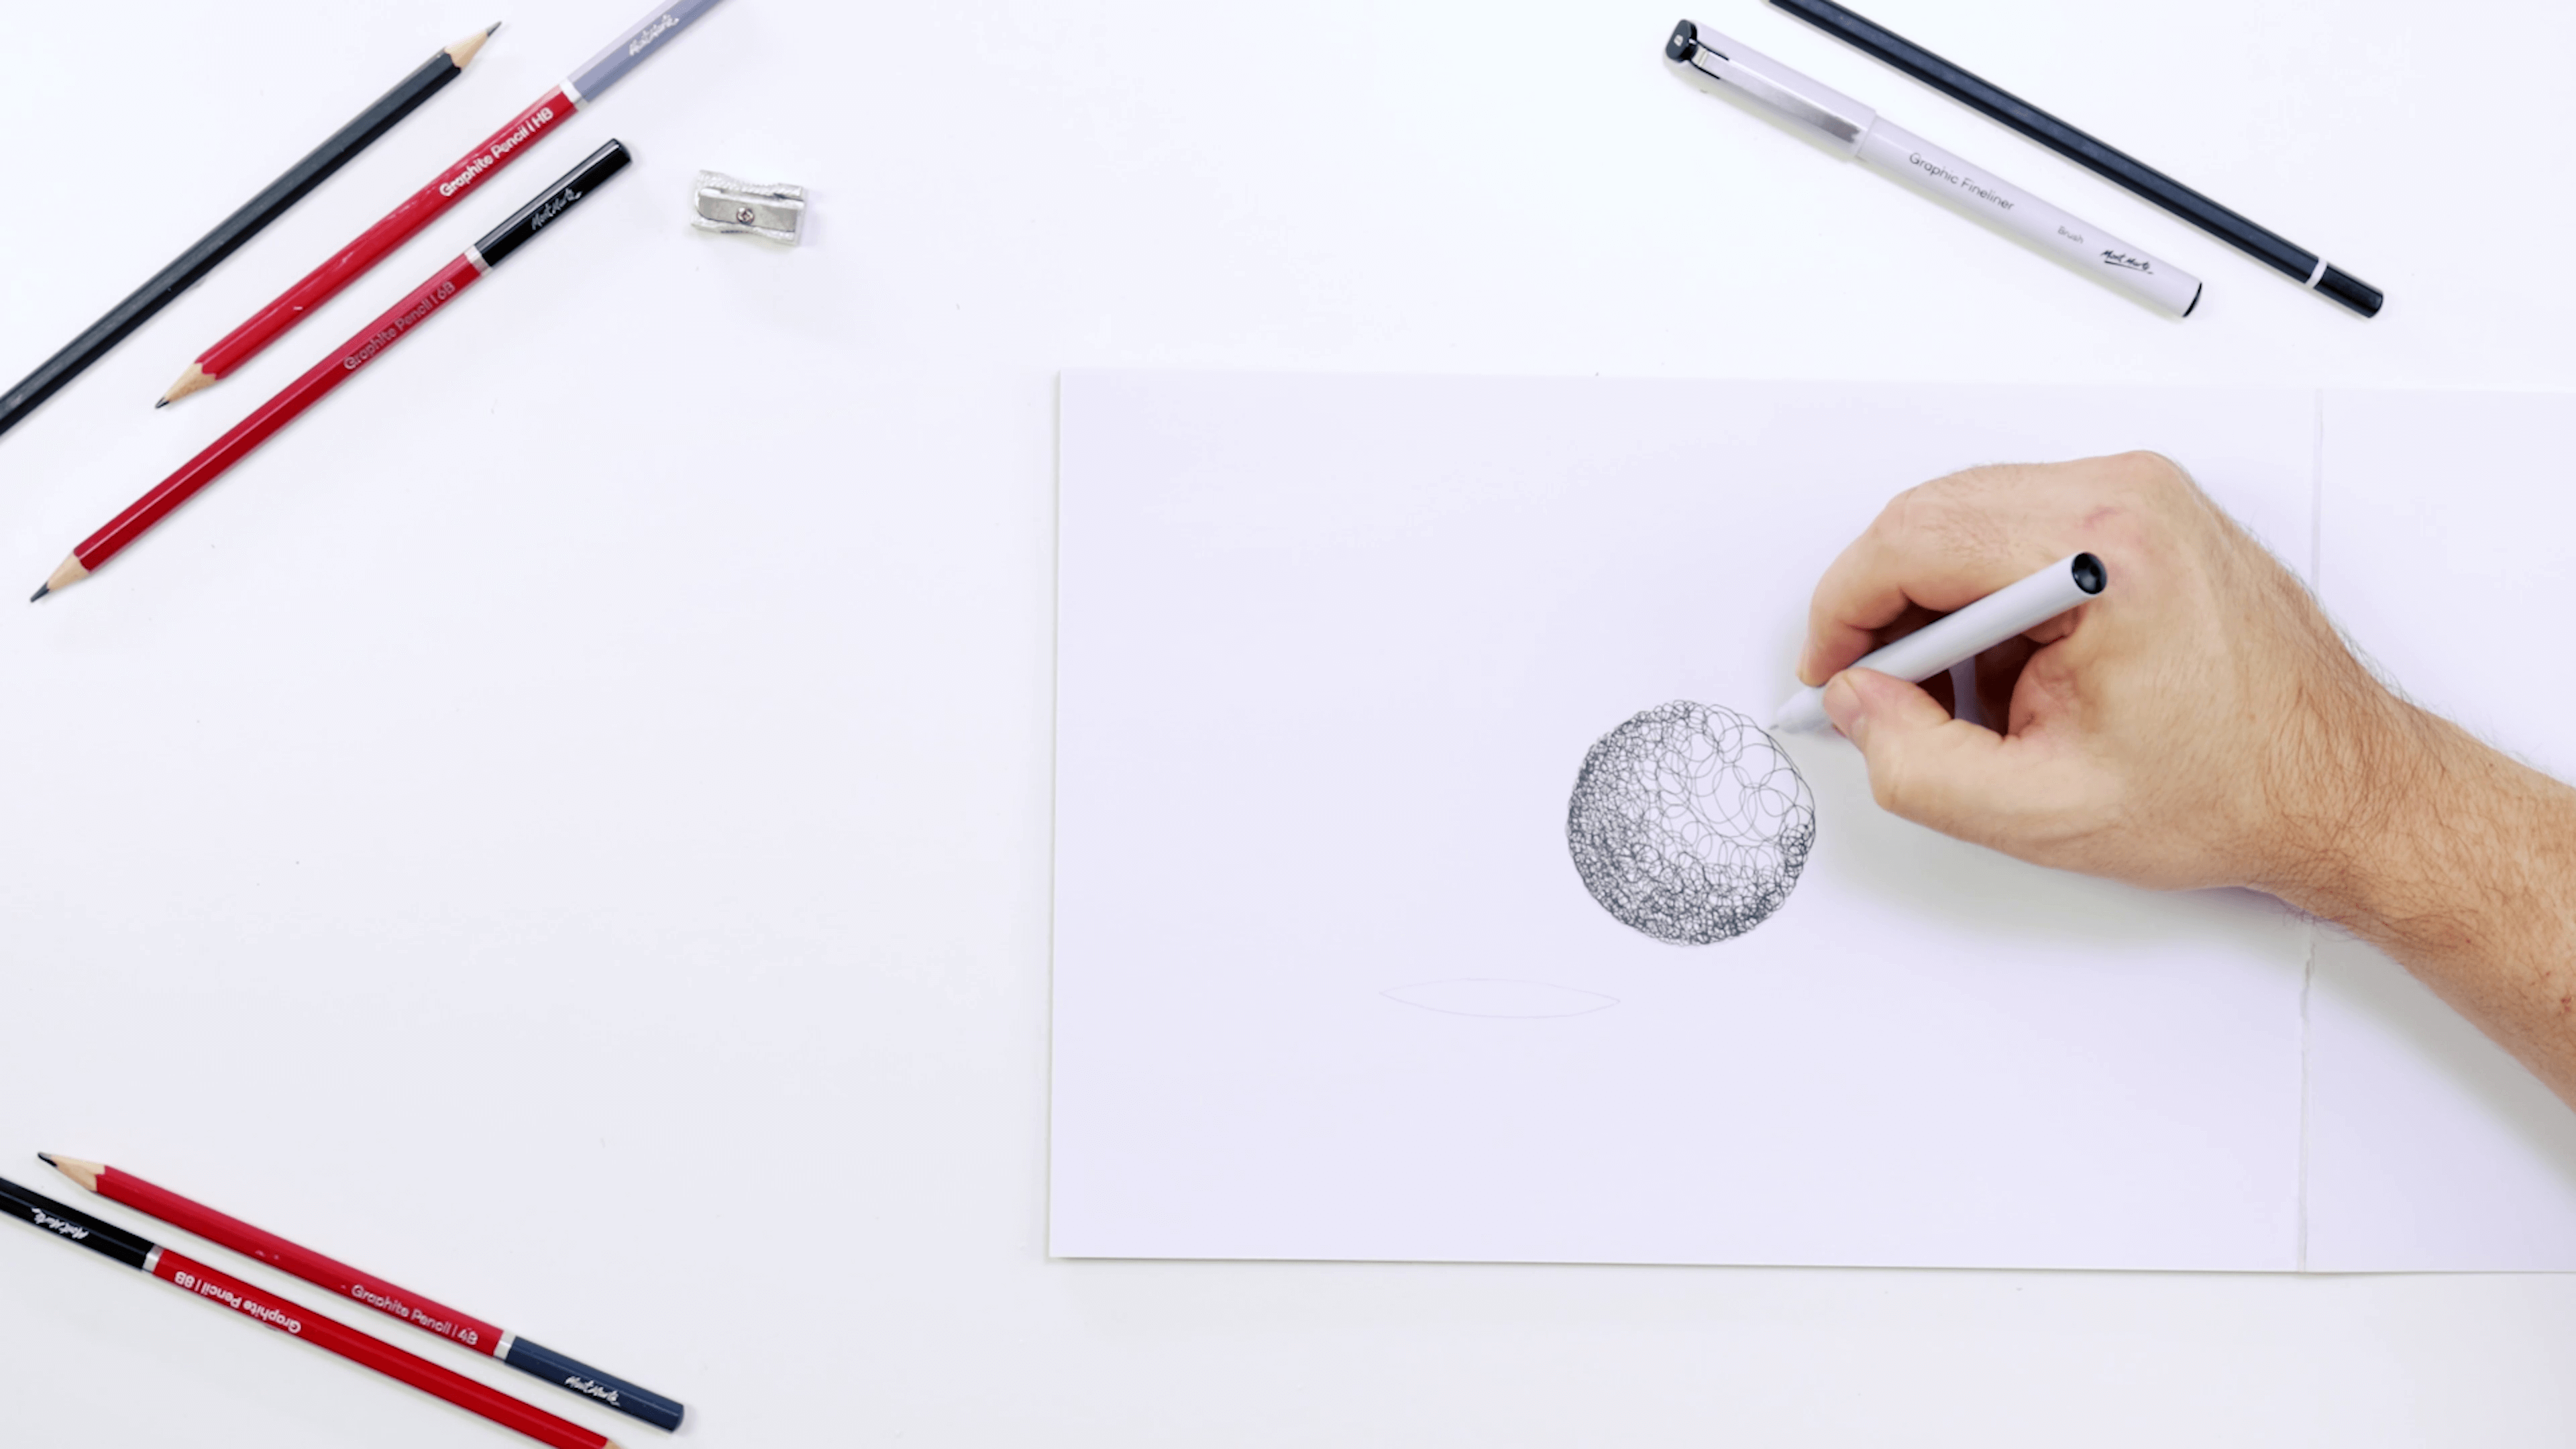 Pen scribbling lines in the form of a sphere.